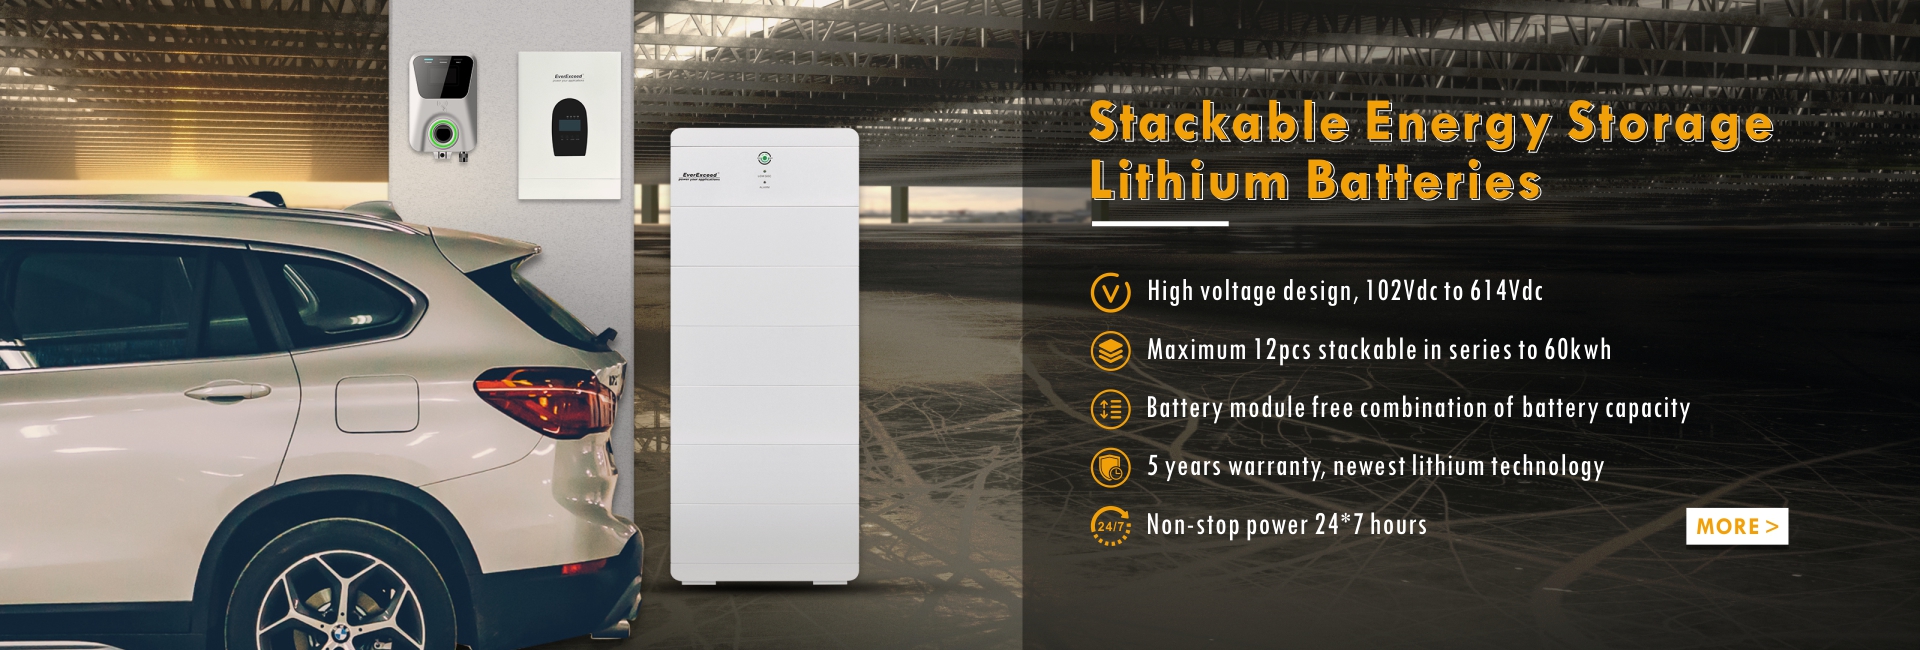 Stackable Energy Storage Lithium Batteries